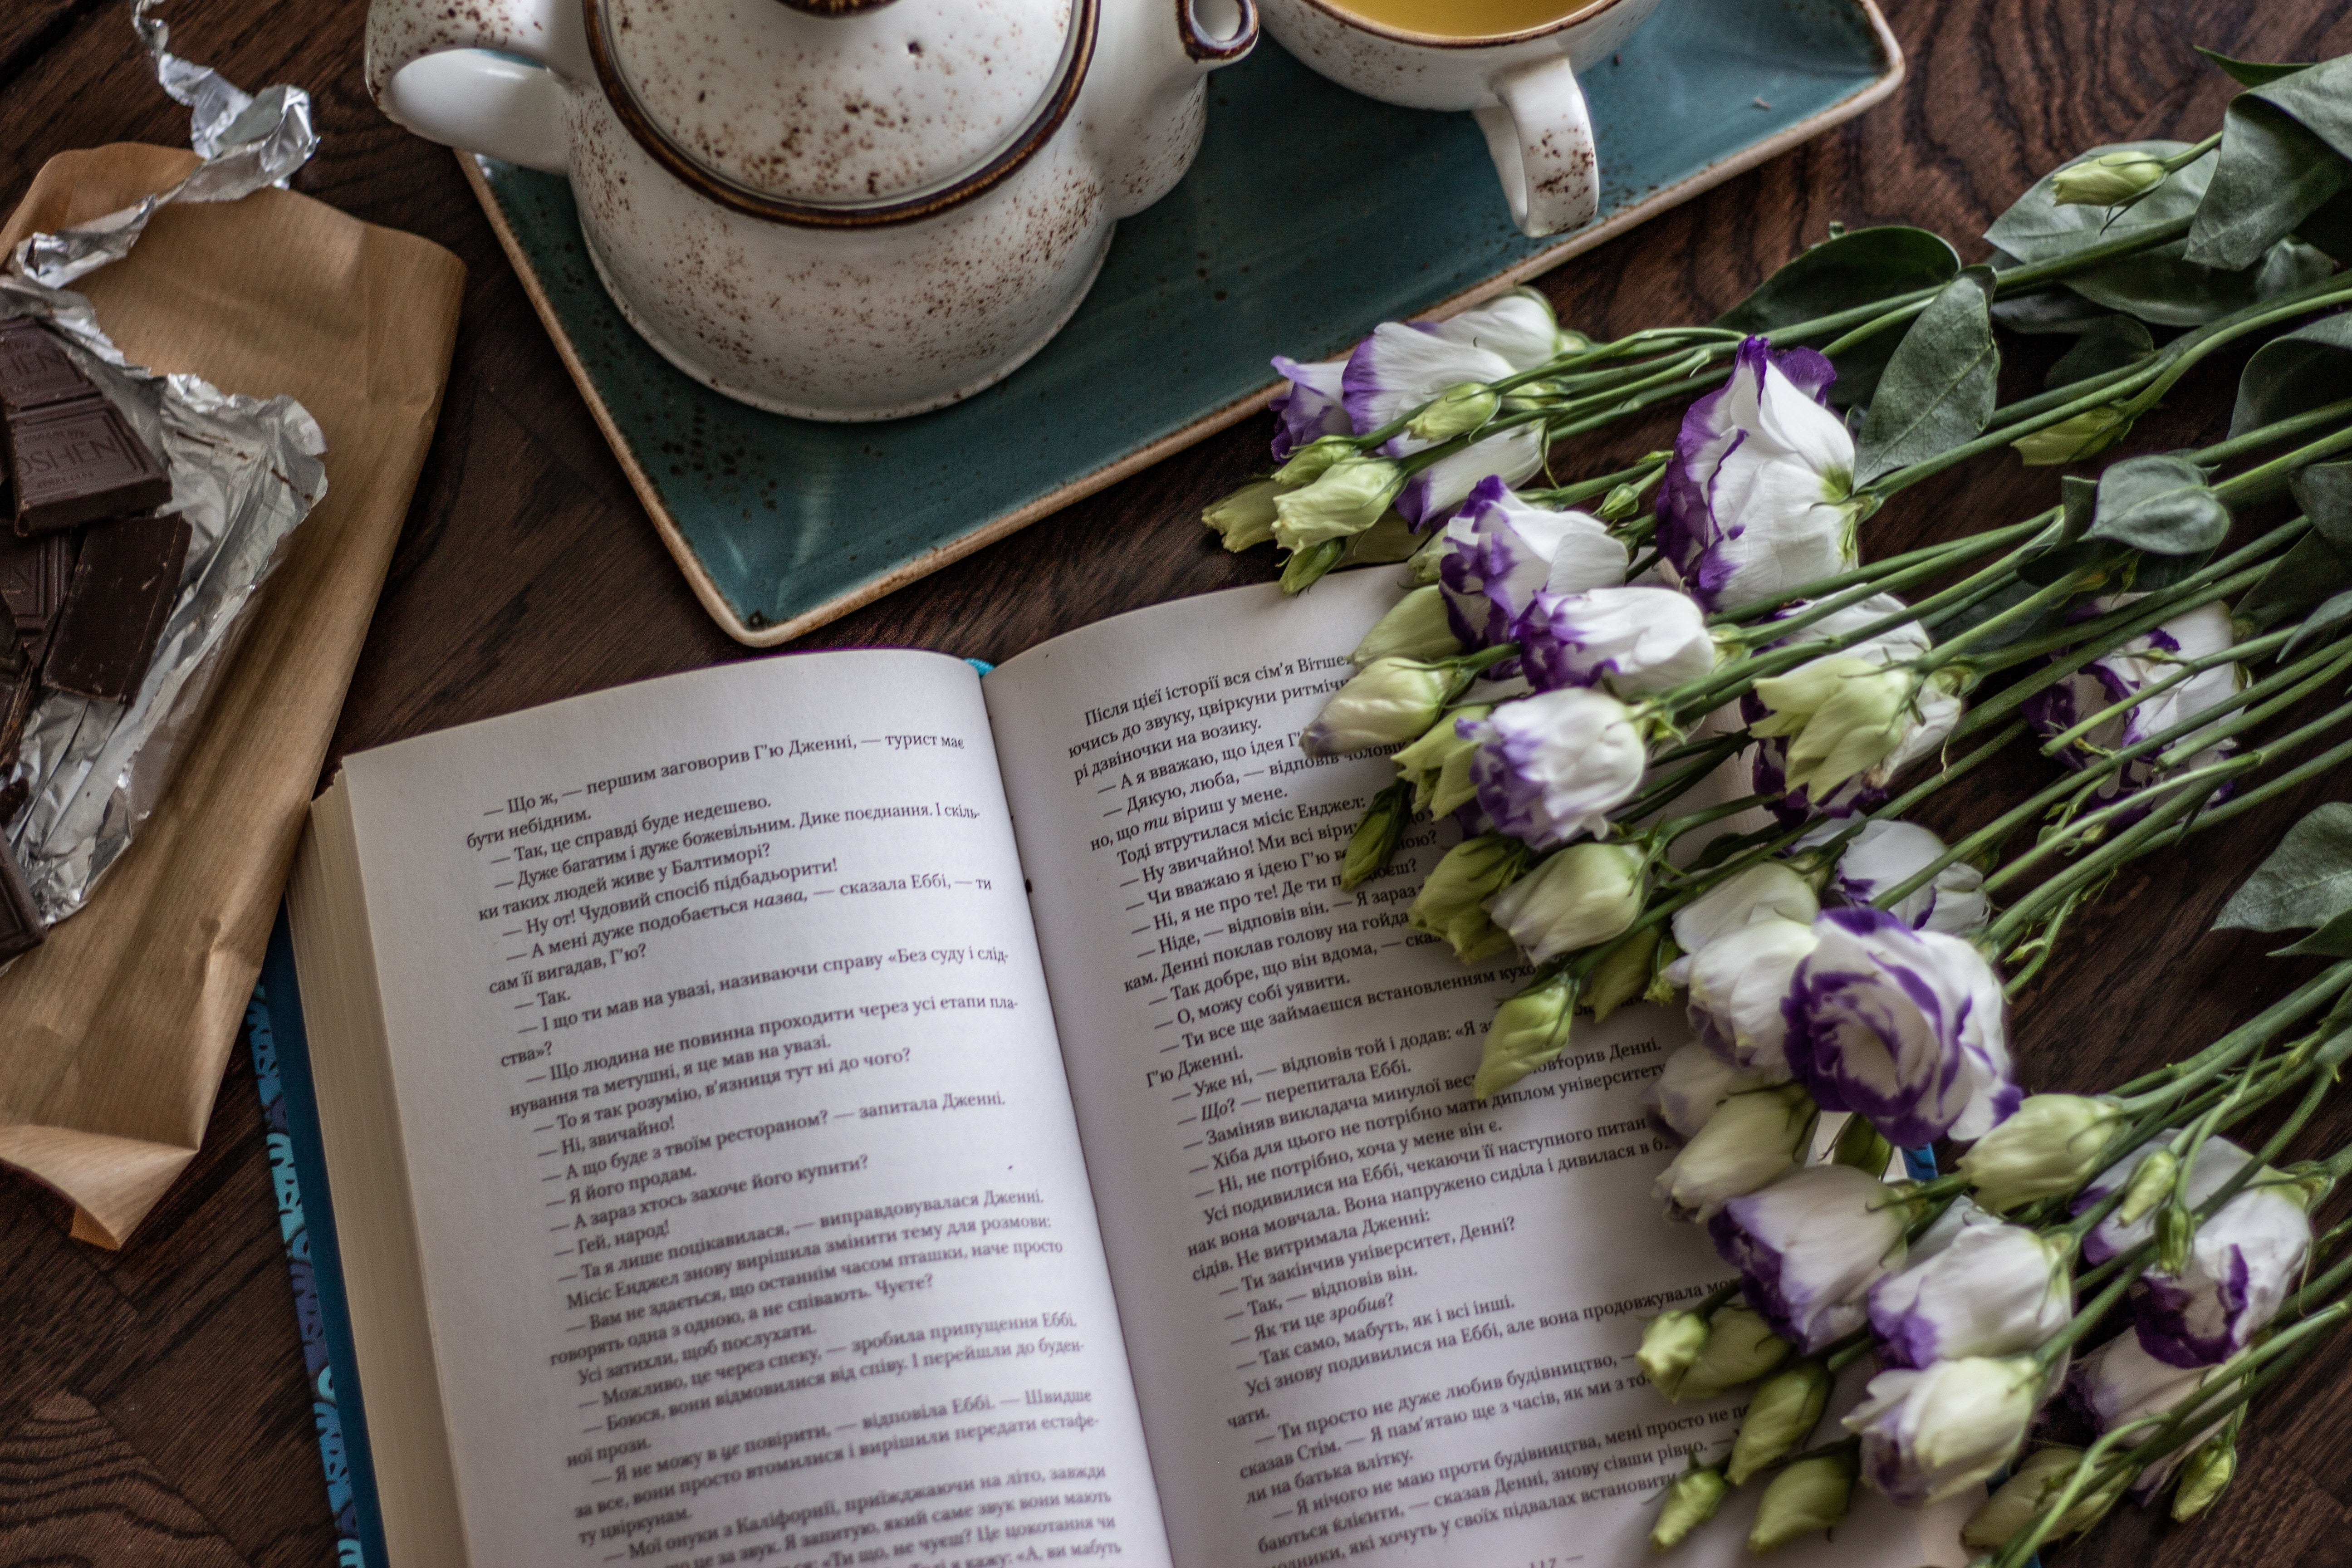 book on table with teaset and white purple-tinged roses